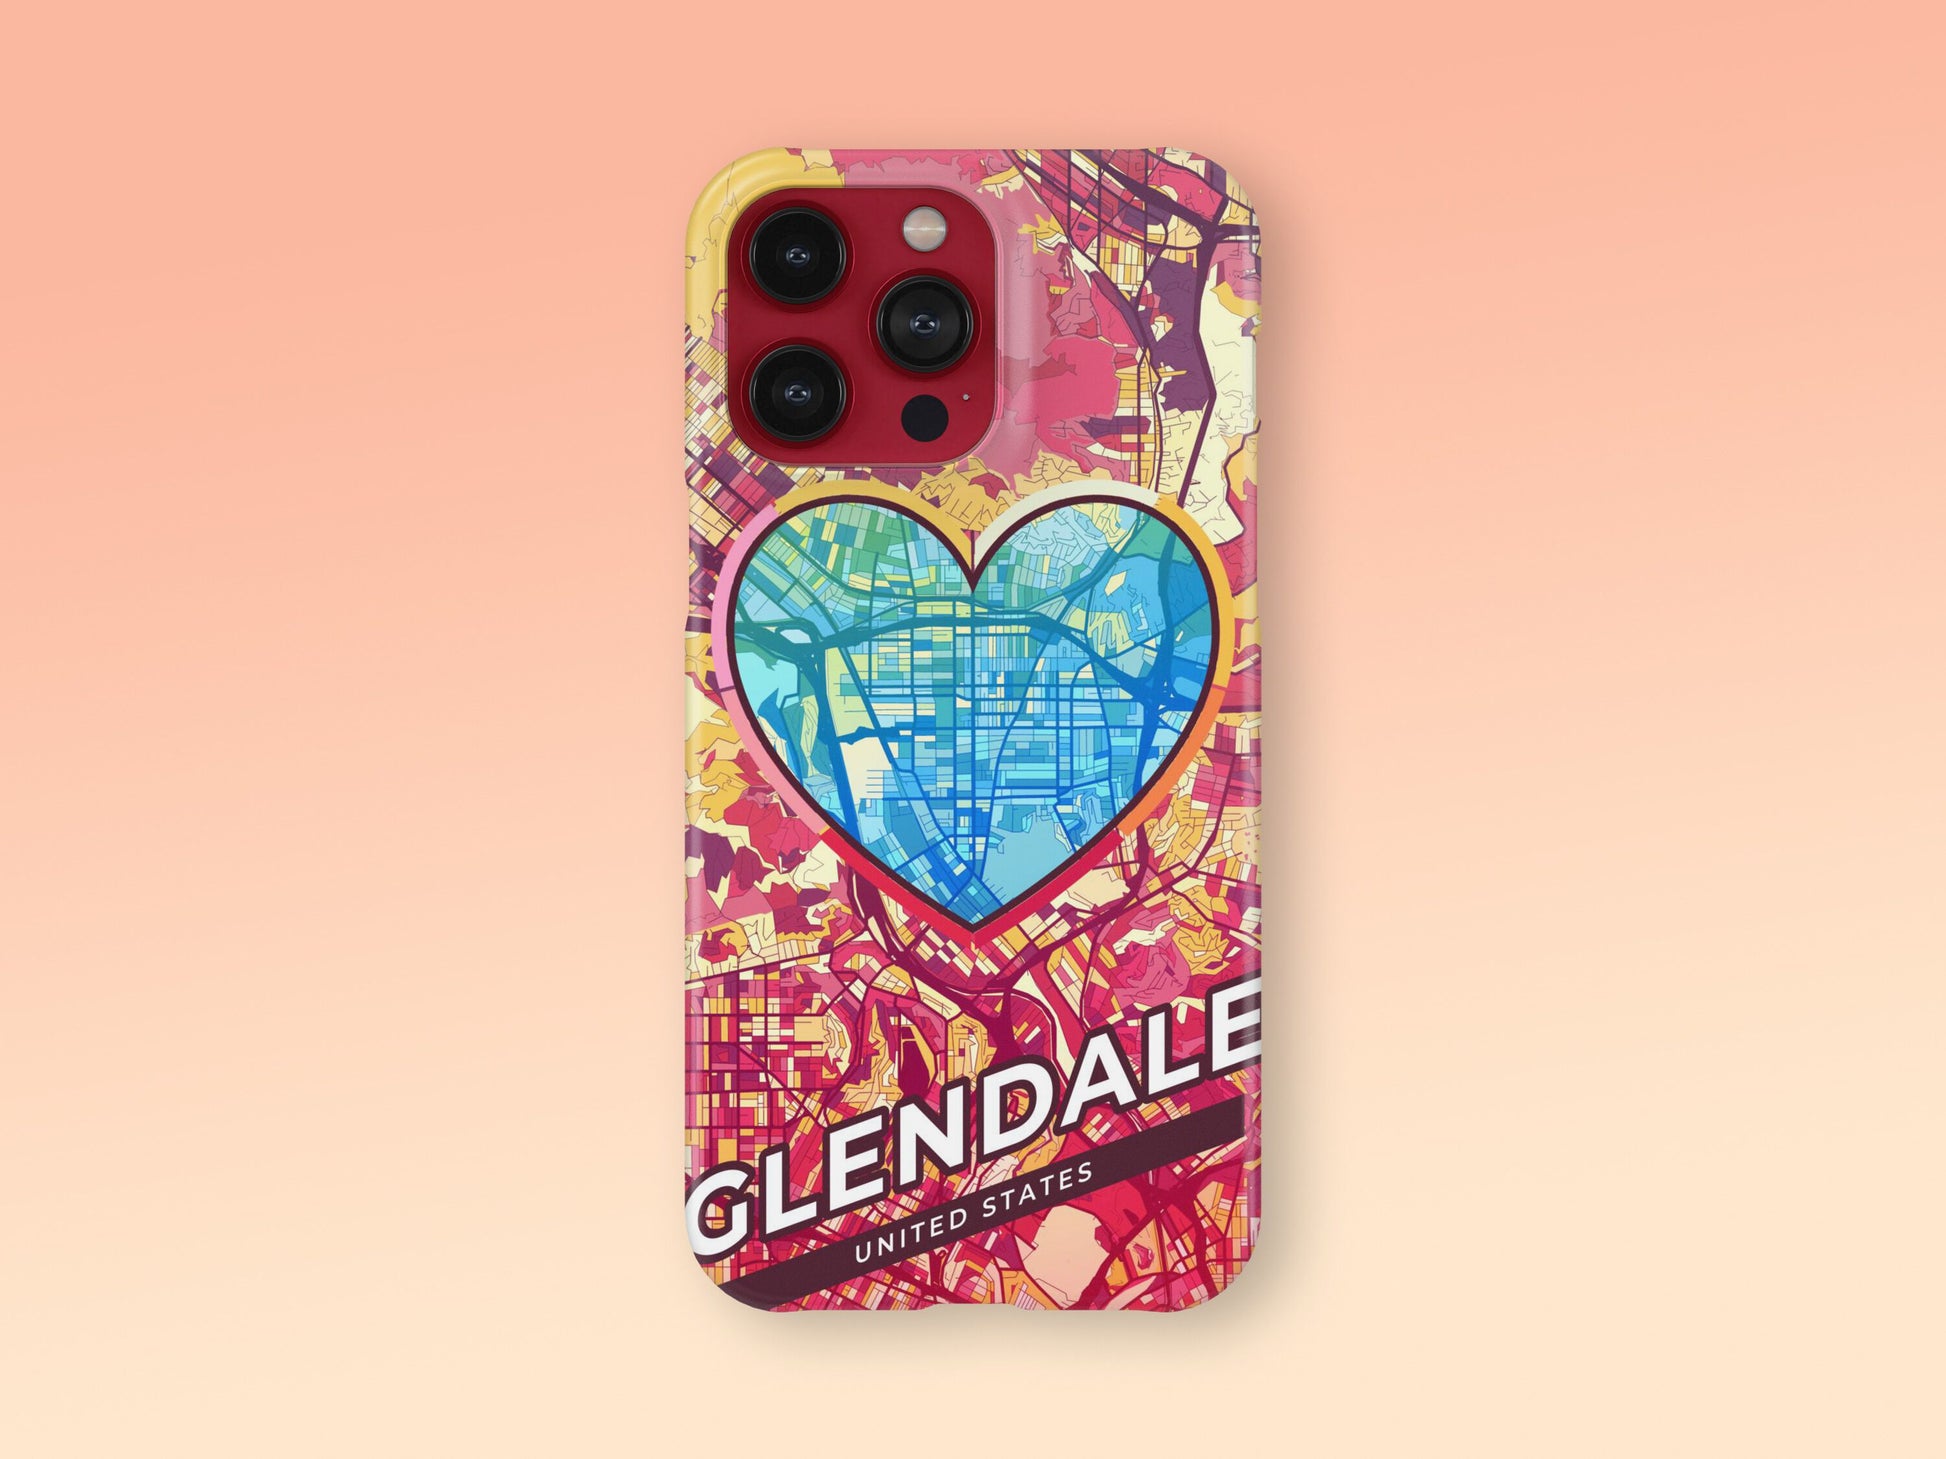 Glendale California slim phone case with colorful icon. Birthday, wedding or housewarming gift. Couple match cases. 2